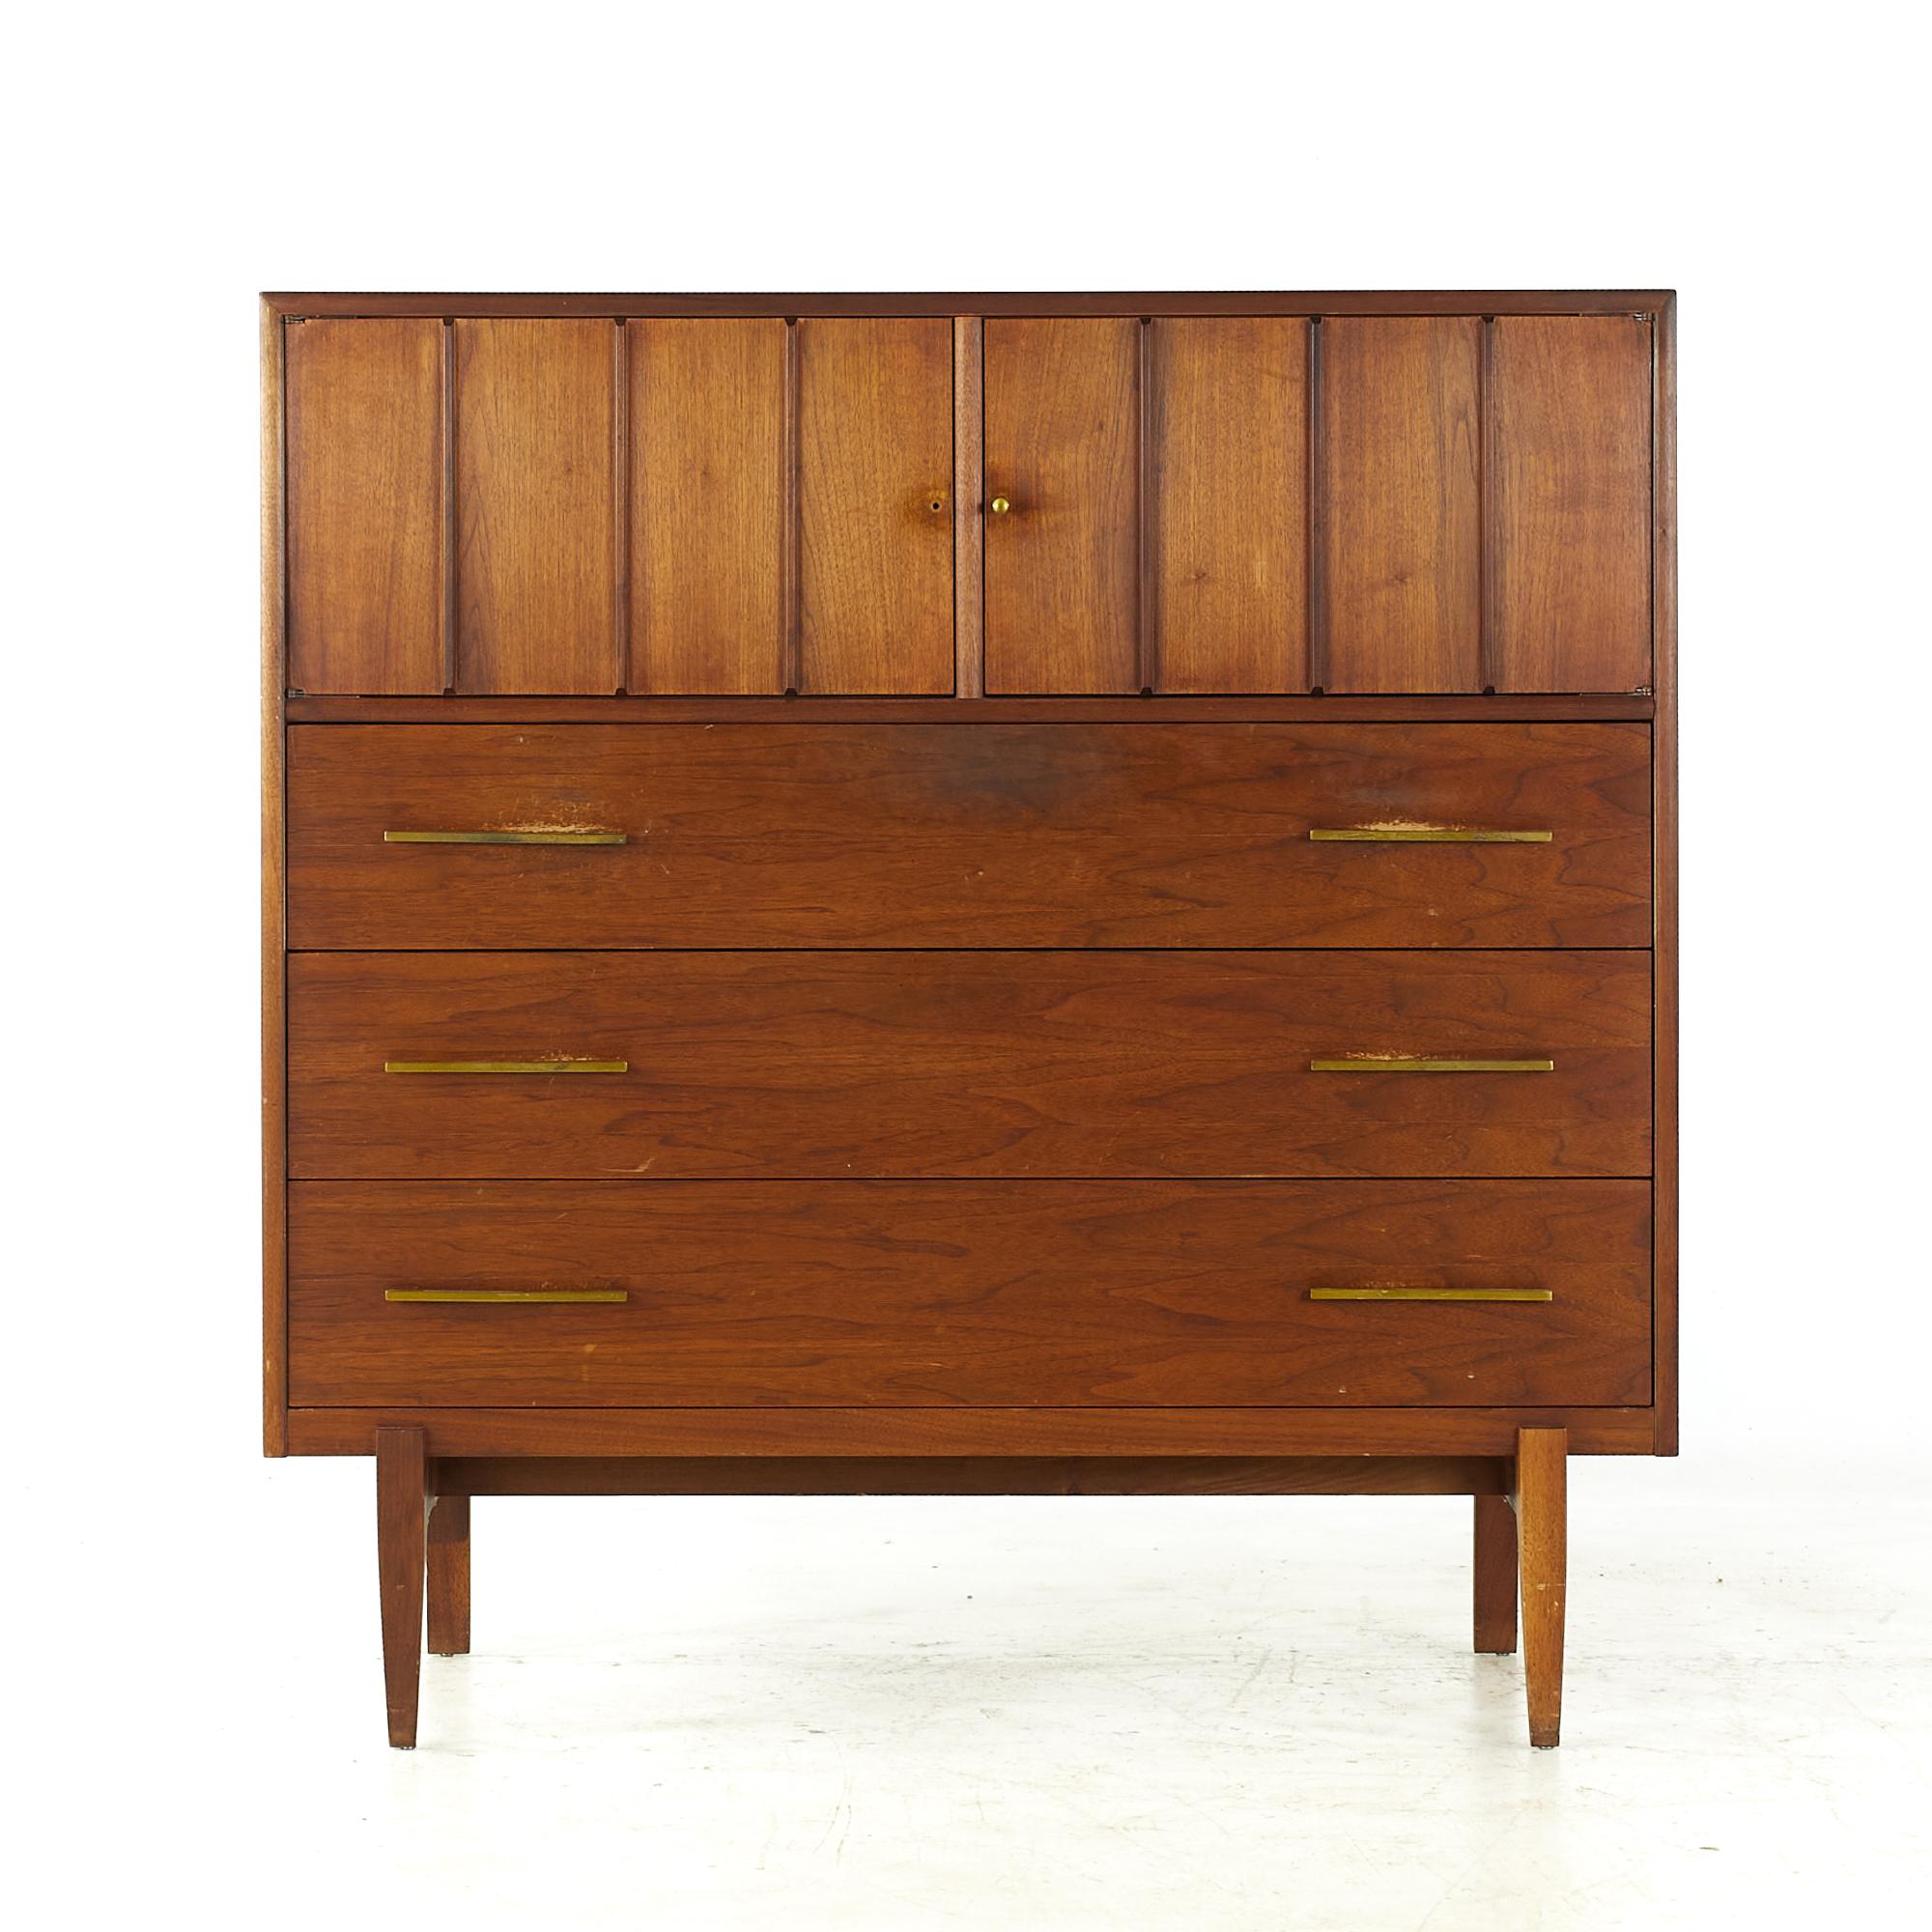 Jack Cartwright Style Ramseur midcentury walnut and brass highboy dresser

This highboy measures: 44 wide x 18 deep x 45.5 inches high

All pieces of furniture can be had in what we call restored vintage condition. That means the piece is